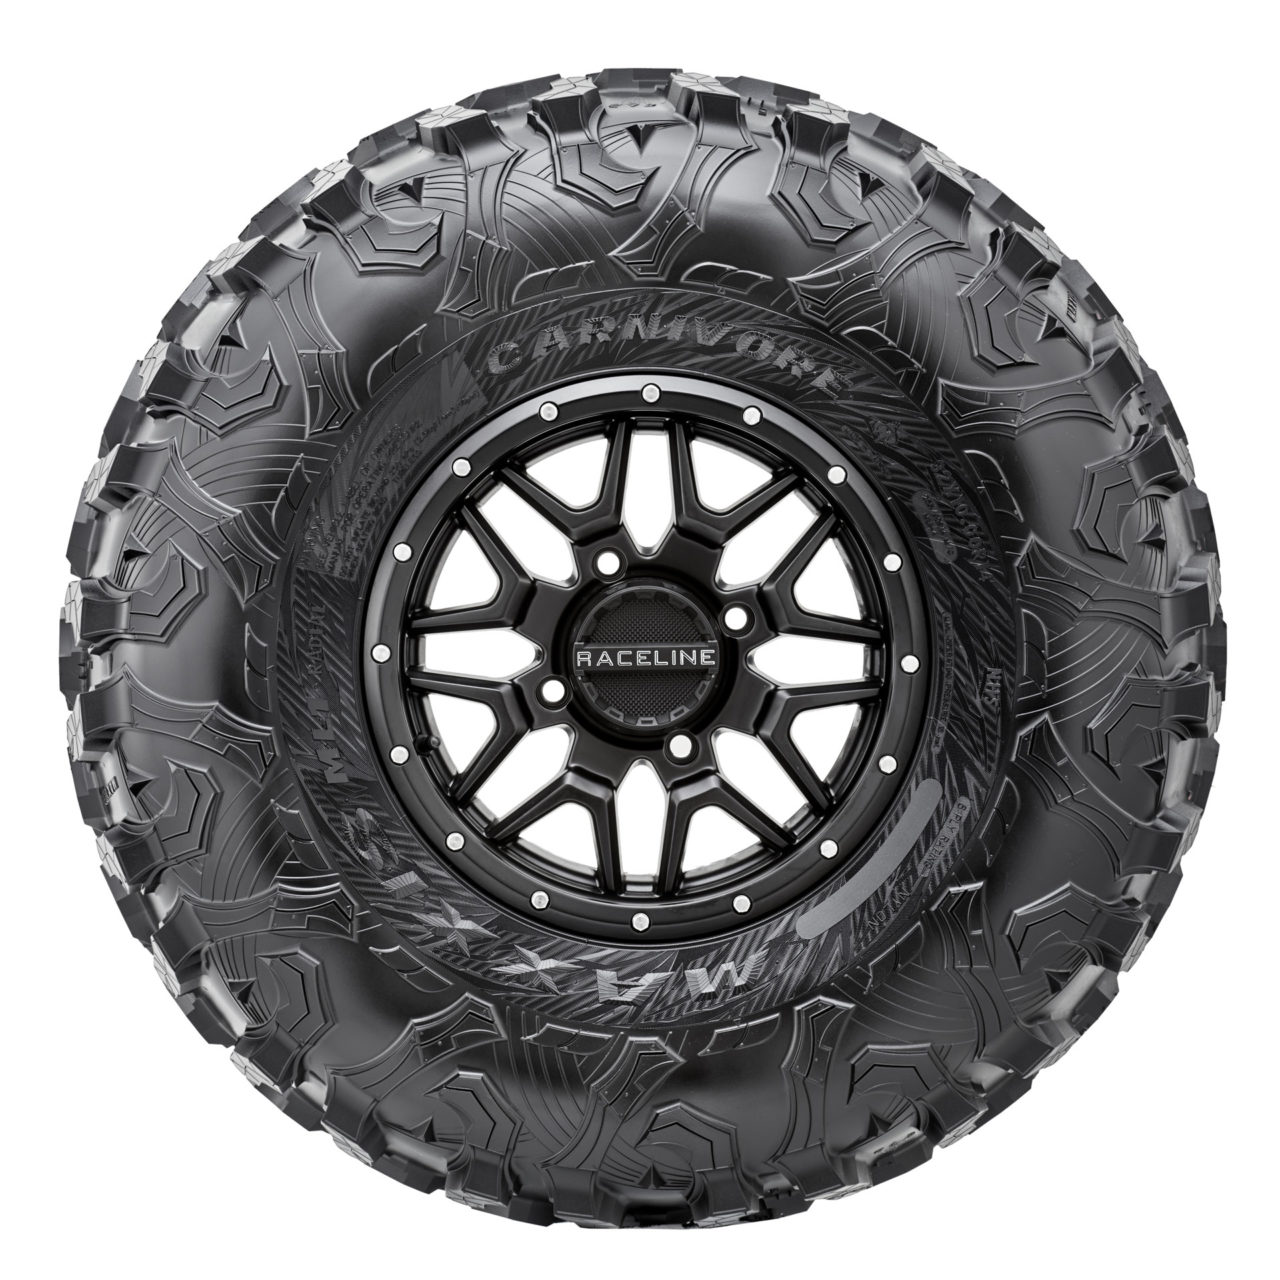 Maxxis Carnivore UTV/side by side tire product image